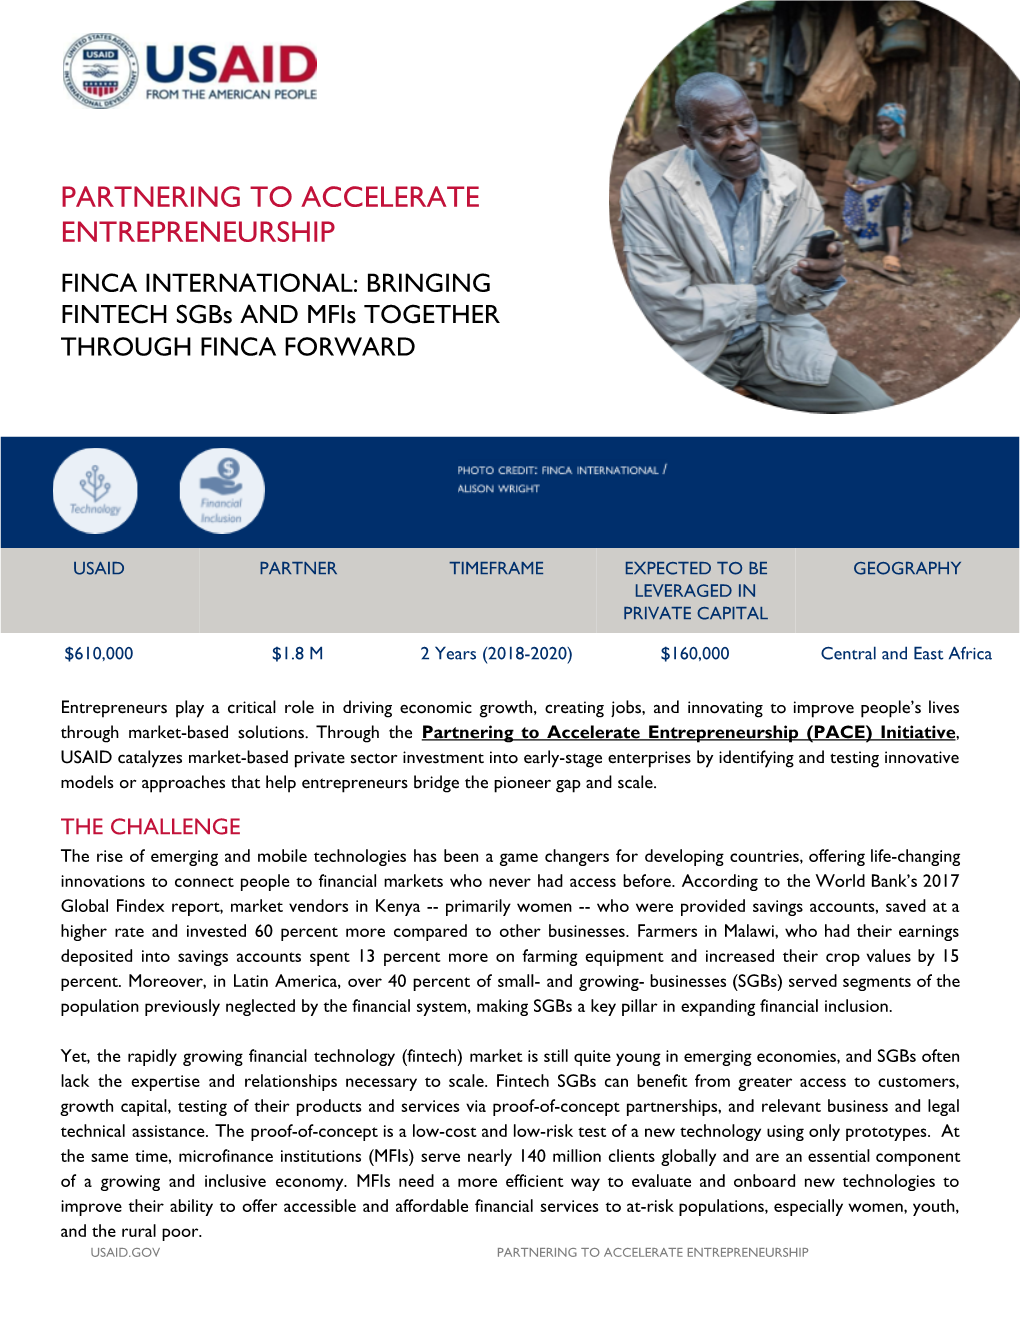 BRINGING FINTECH Sgbs and Mfis TOGETHER THROUGH FINCA FORWARD